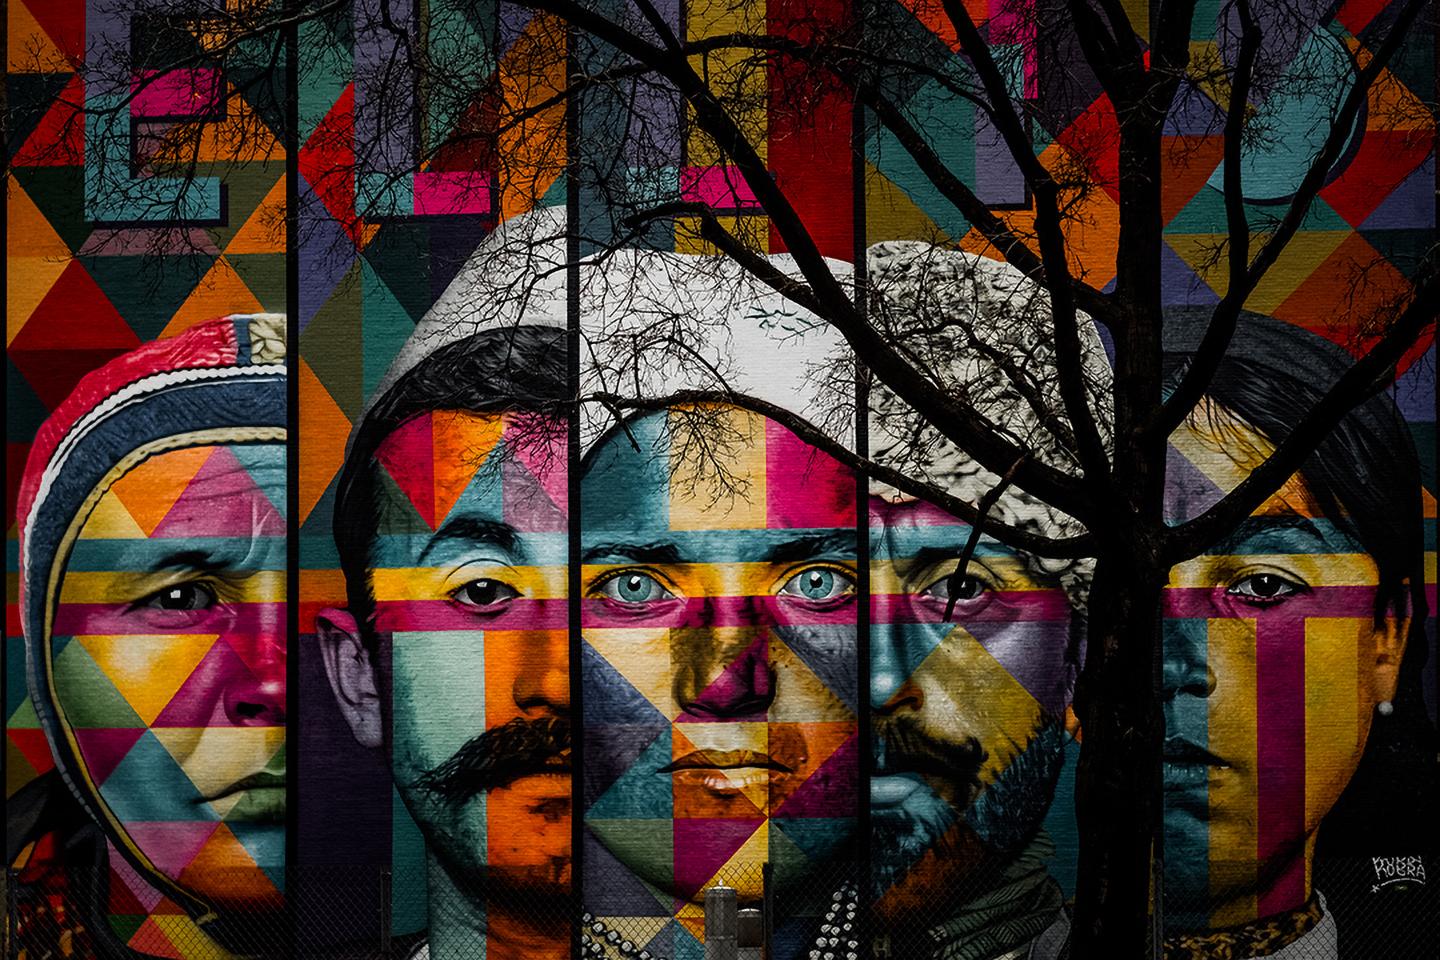 " This giant 20,000 sq ft mural in NYC (the largest in NYC when unveiled in 2018 for sure) is titled “Ellis Island”… as a nod to immigrants that passed through it. The amazing Brazilian artist, Eduardo Kobra, has painted 19 of these color-popping,